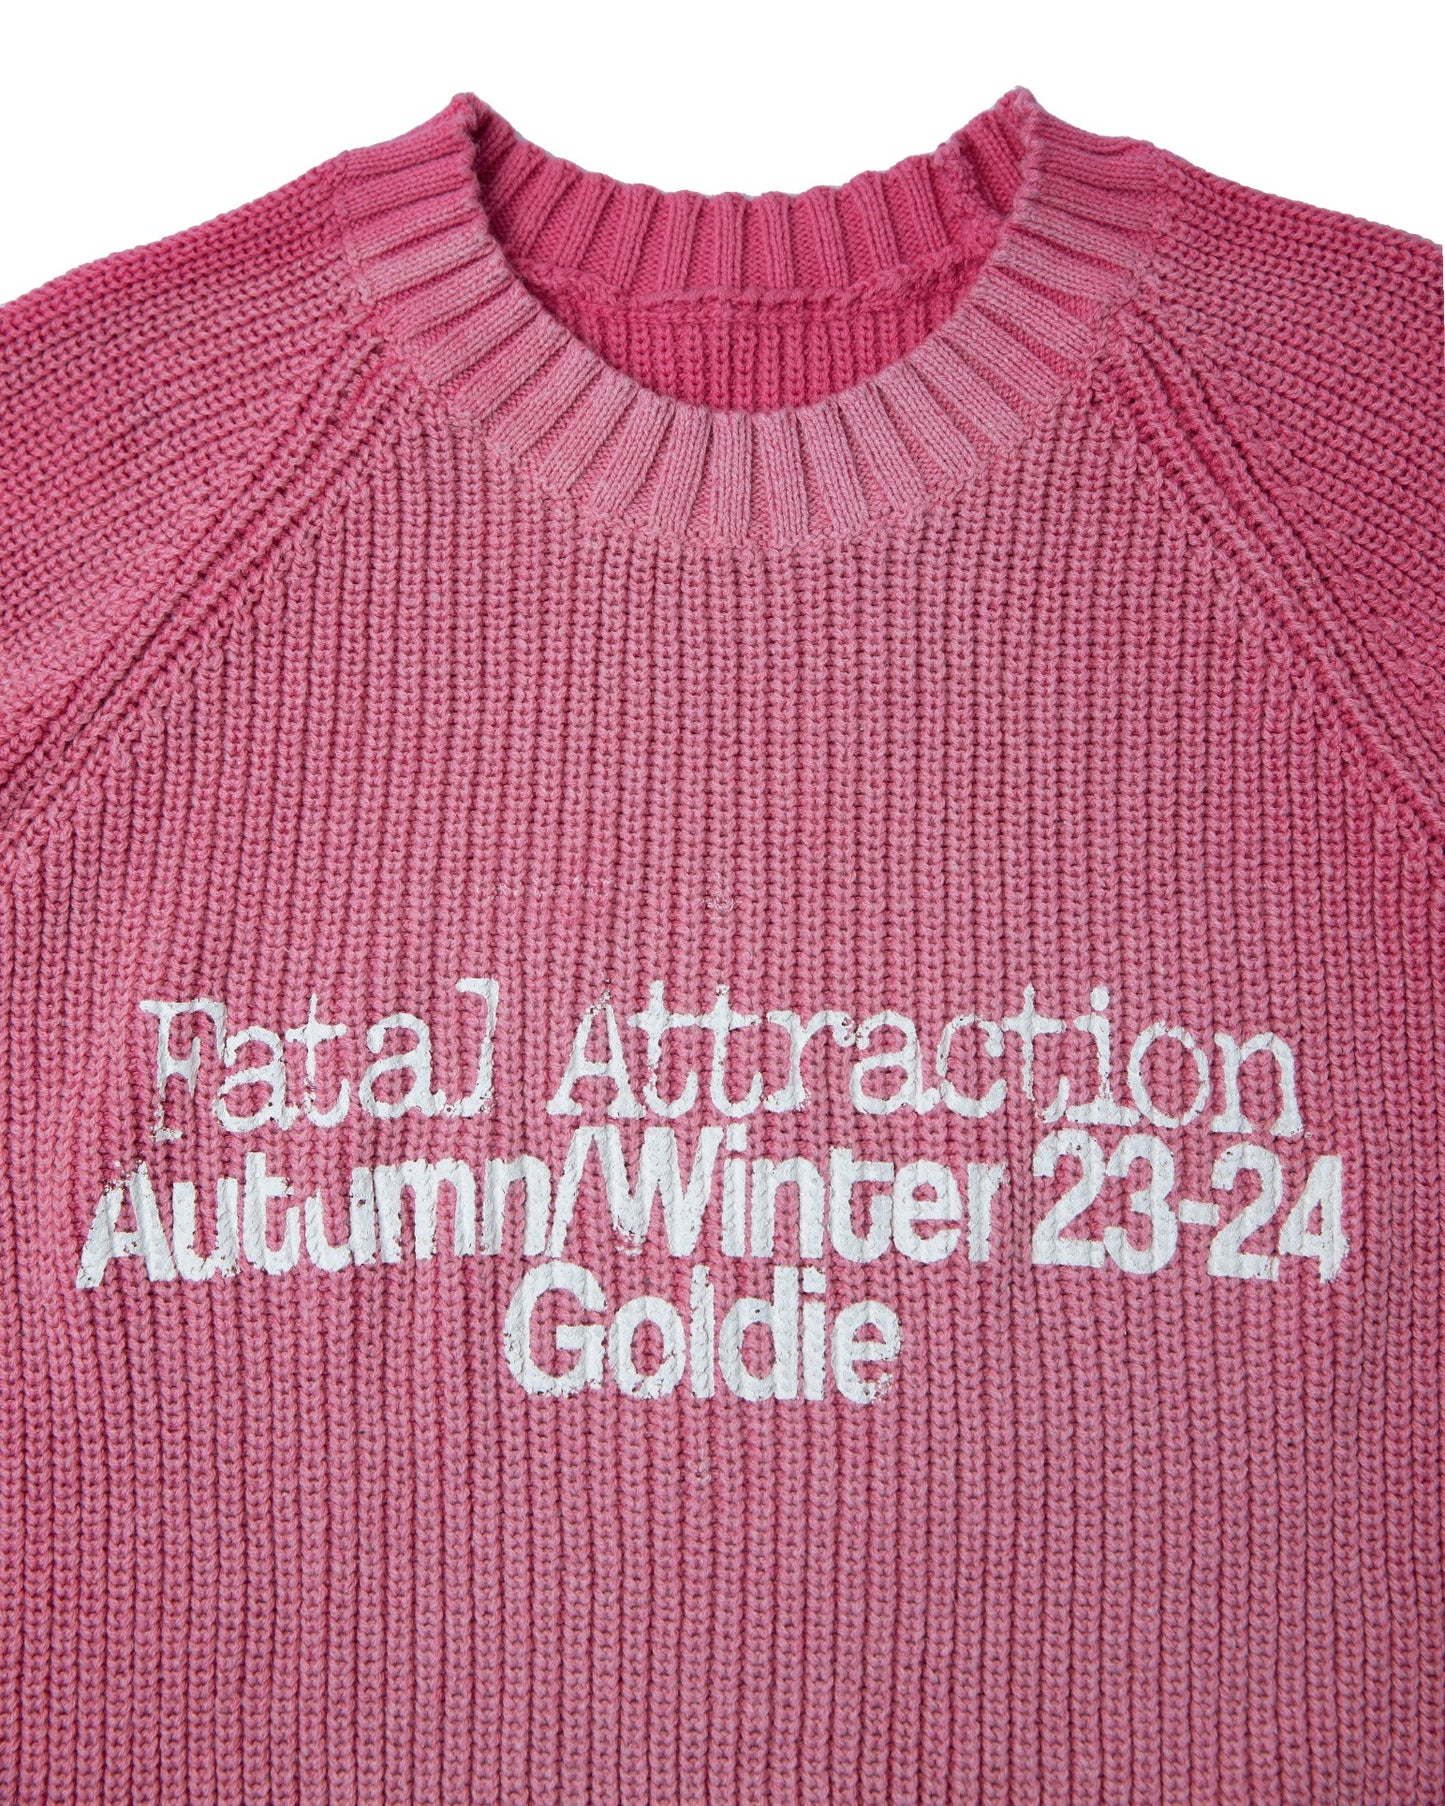 f-a-pink-knit-sweater-GOLDIE-ASTOUD